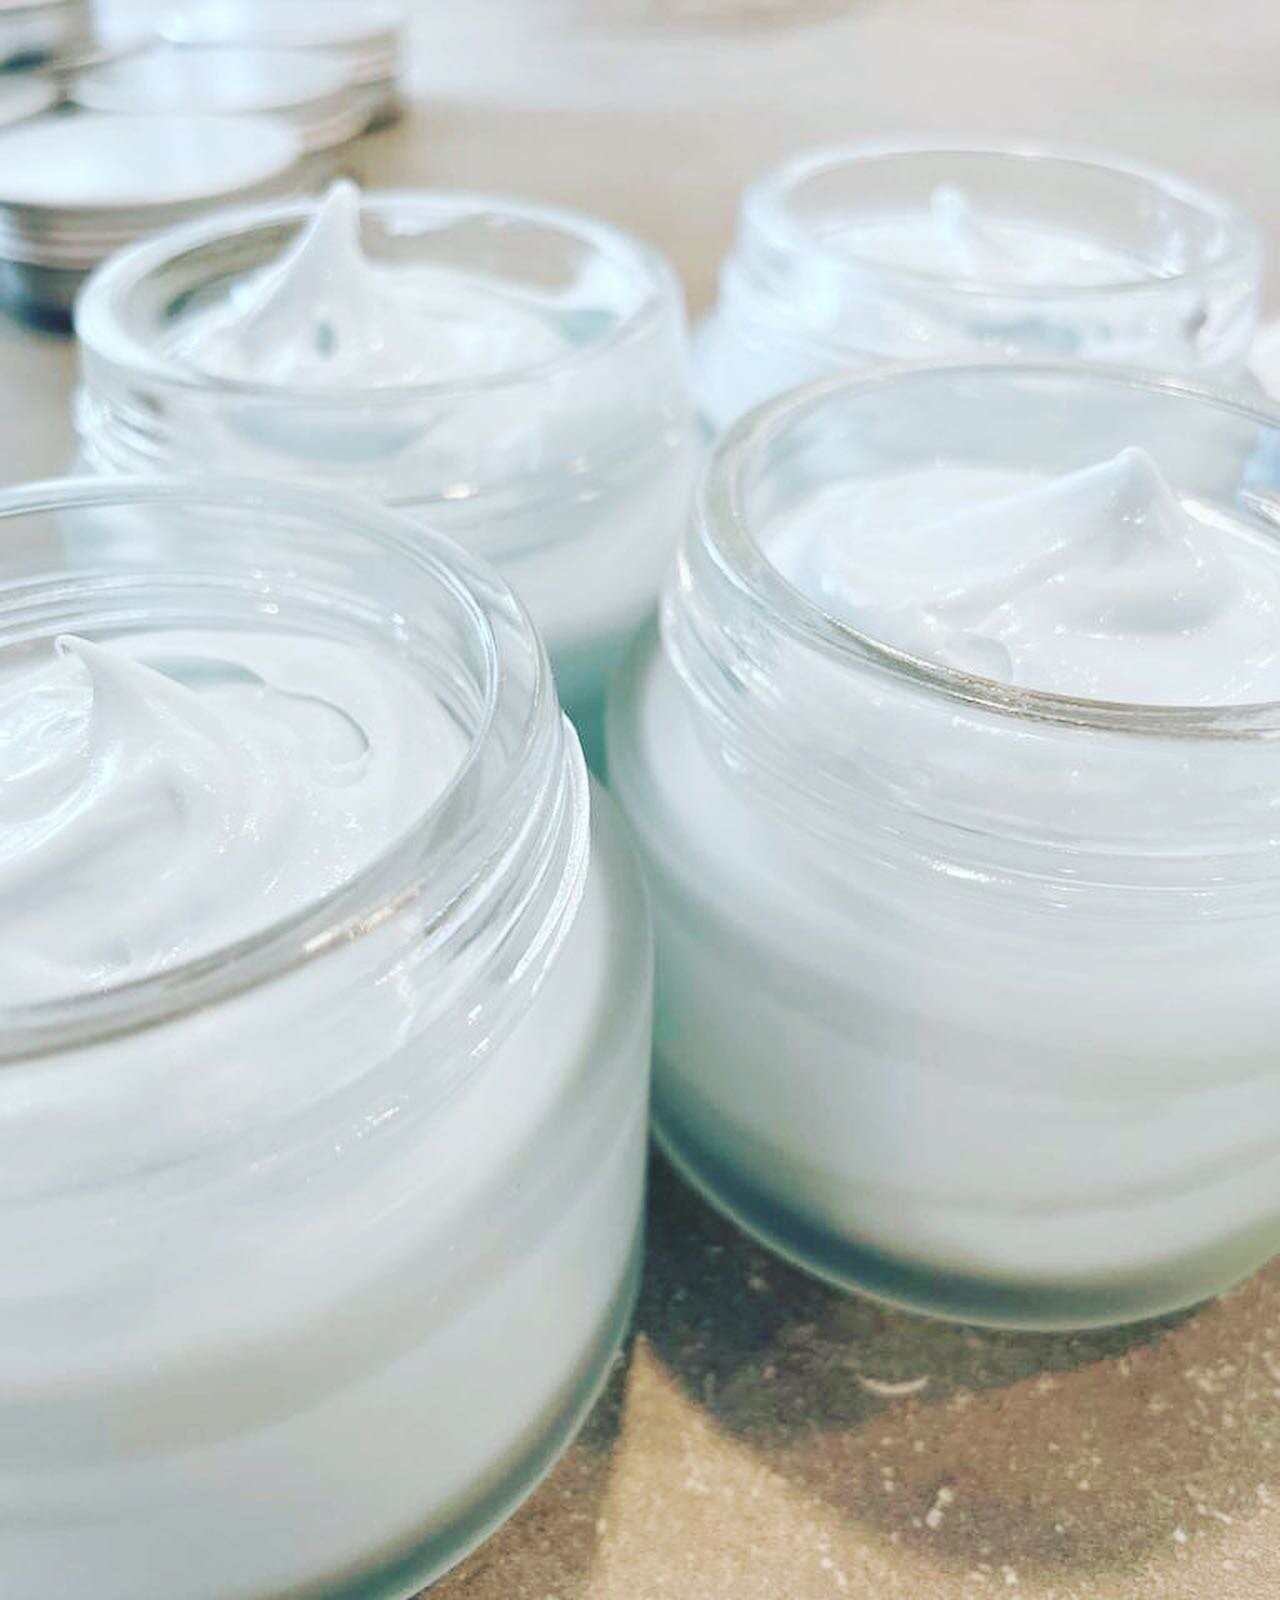 Fresh beautiful skin care made by us today and shipped to you tomorrow!

To try these amazing products contact us at
www.florasbare.com
www.florasbare.co.uk
 
  #givethegiftofnaturalskincare 
#handcraftedskincare #femaleentrepreneurs #cleanbeauty #sm